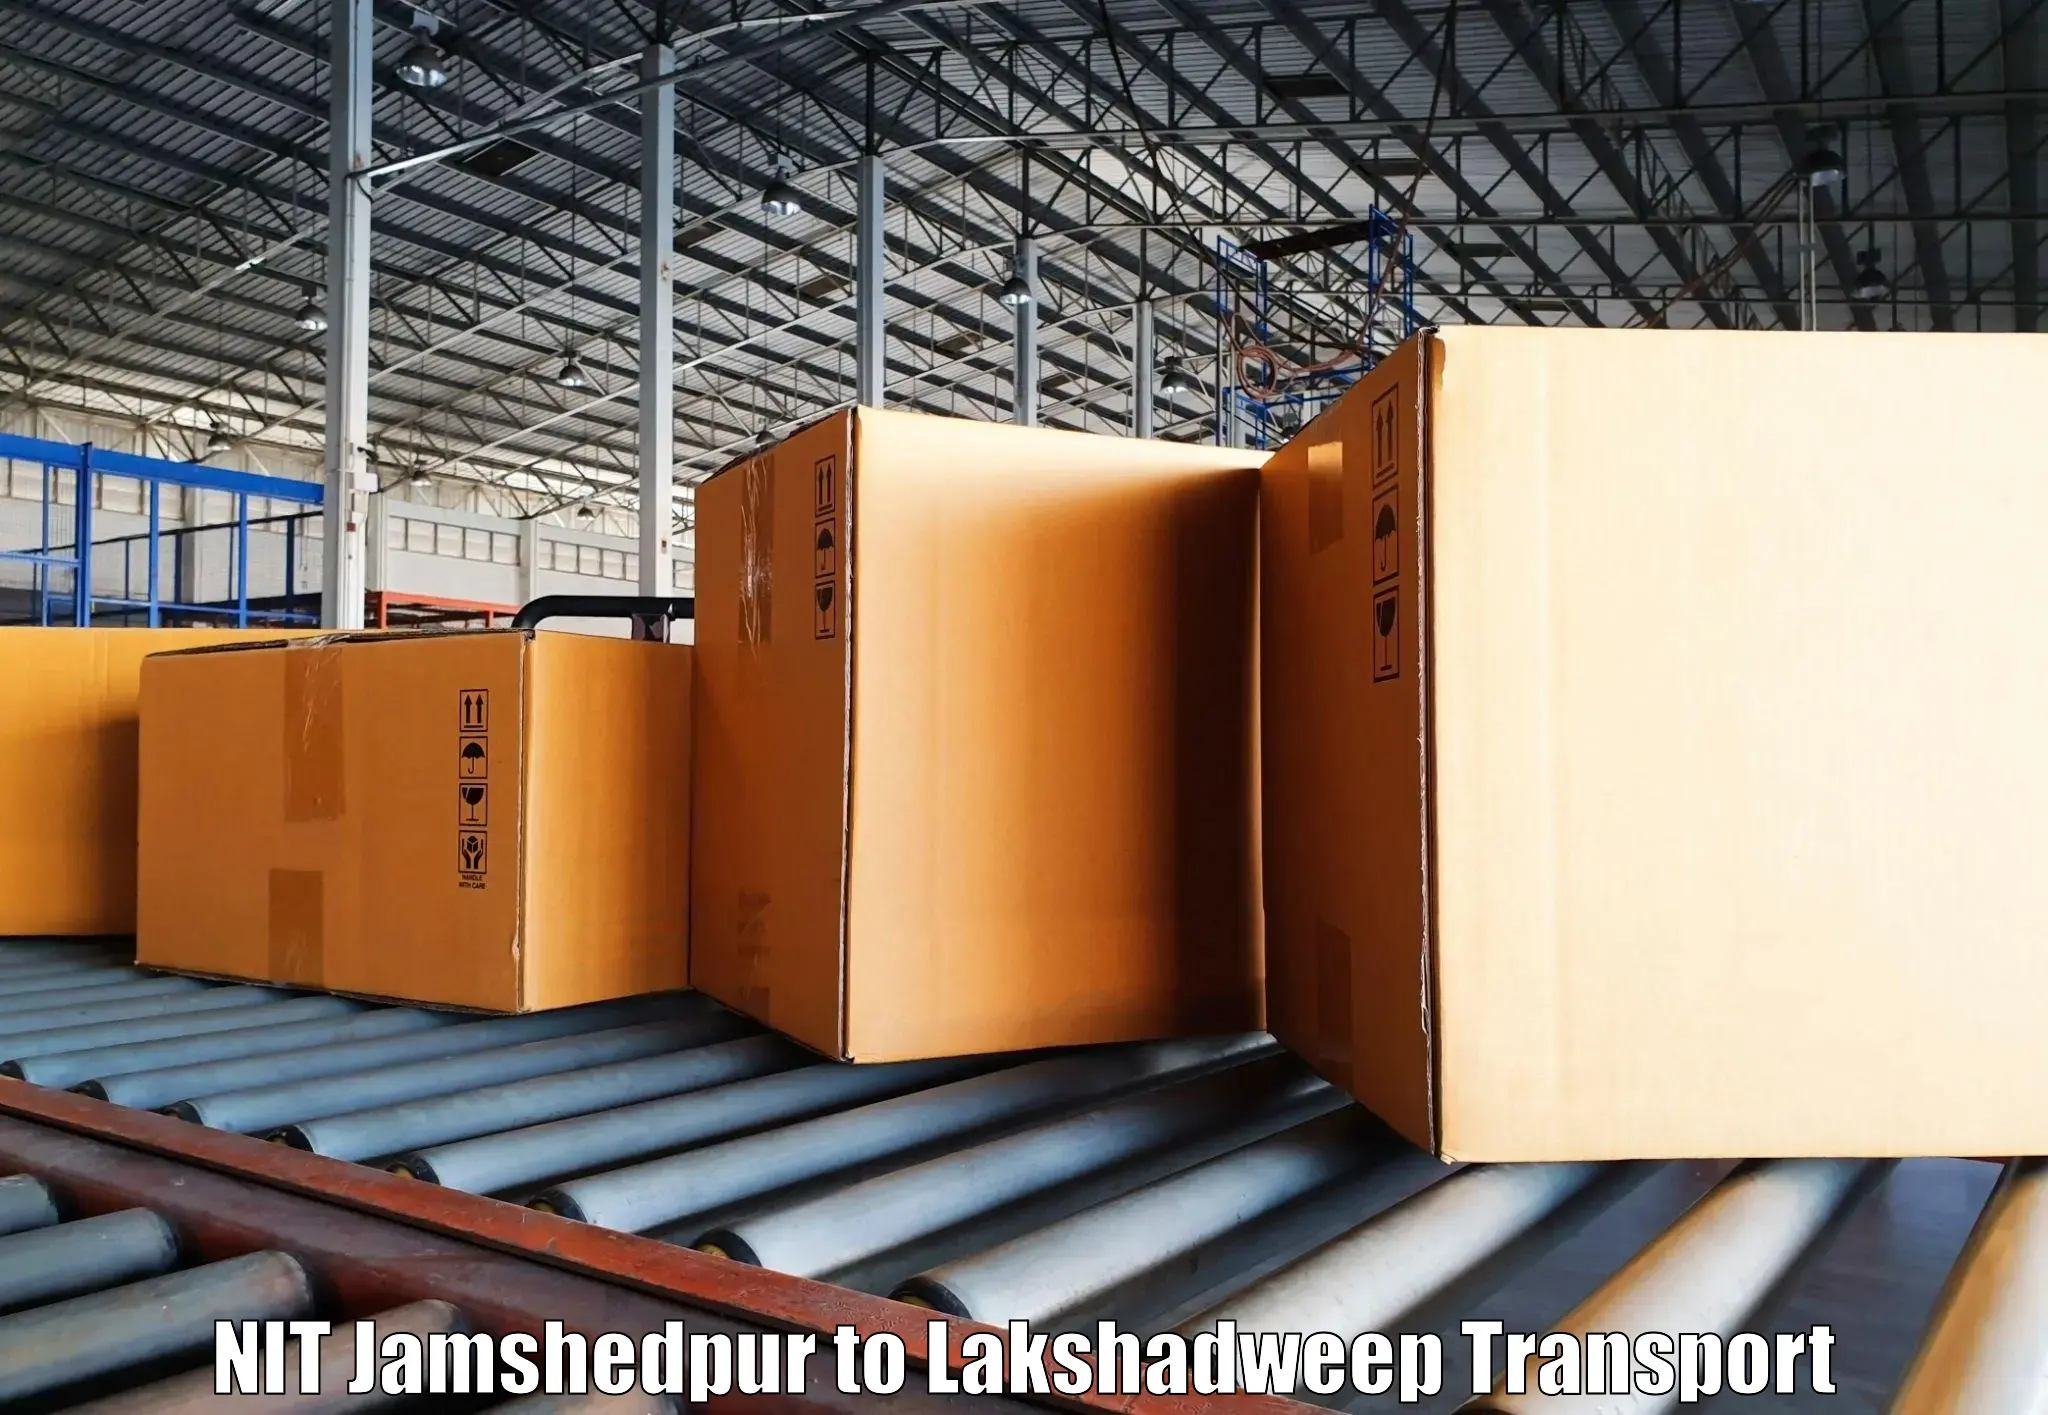 Transport bike from one state to another NIT Jamshedpur to Lakshadweep